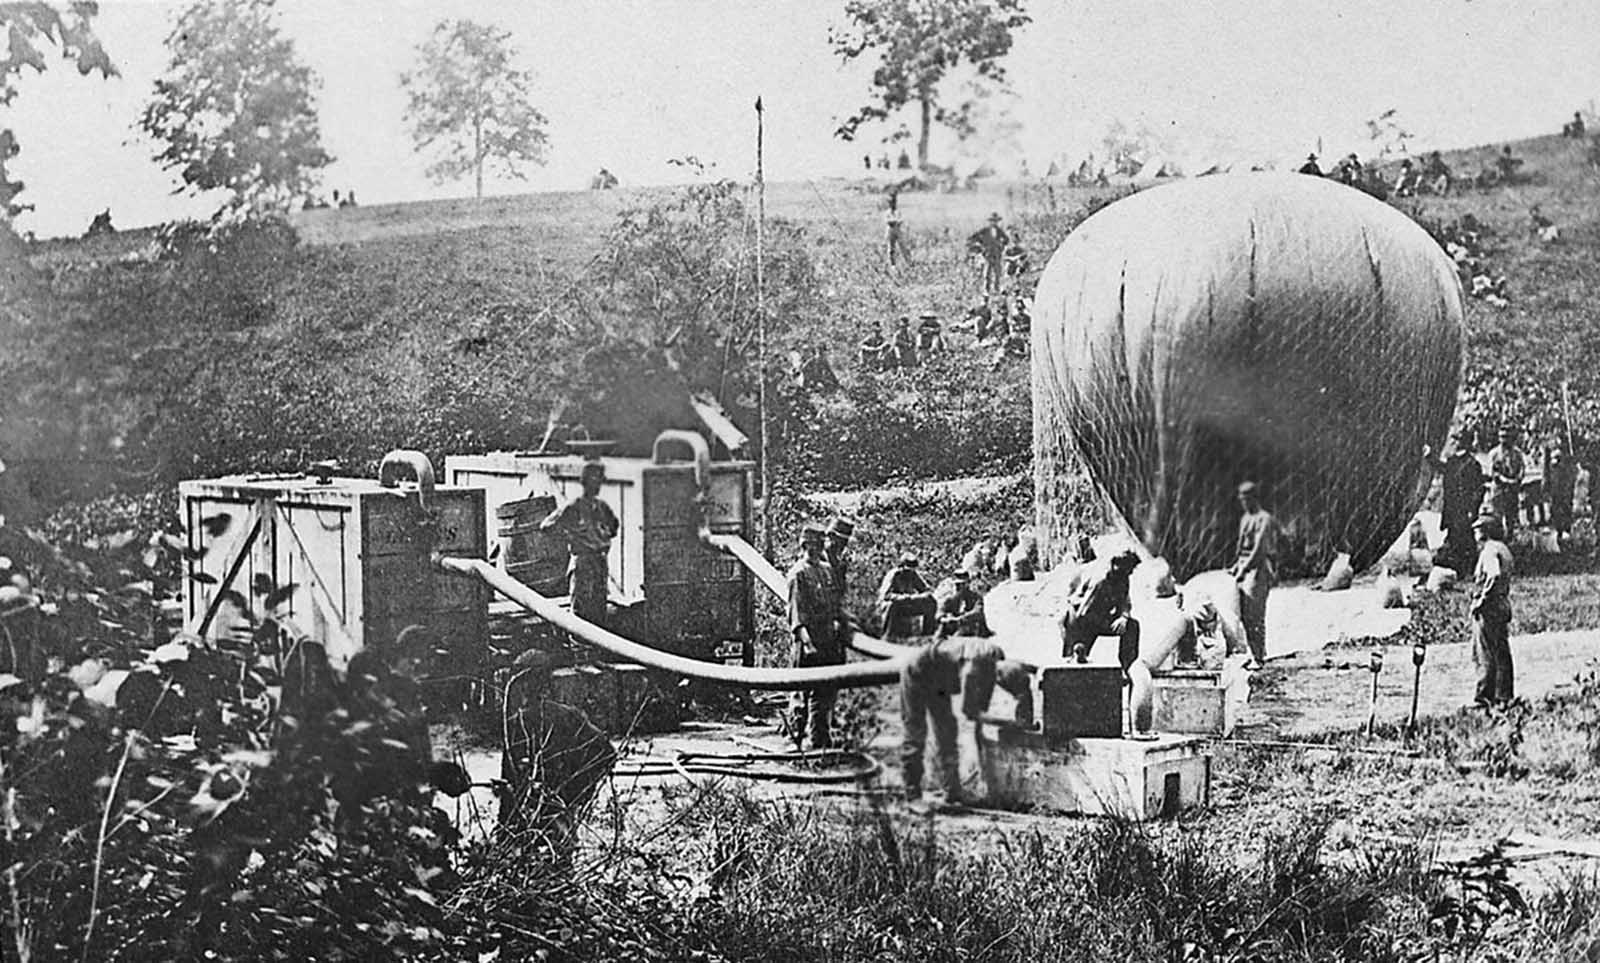 nflation of the Intrepid, a hydrogen gas balloon used by the Union Army Balloon Corps for aerial reconnaissance. The the Balloon Corps operated a total of seven balloons, with the Intrepid being favored by Chief Aeronaut Thaddeus Lowe.